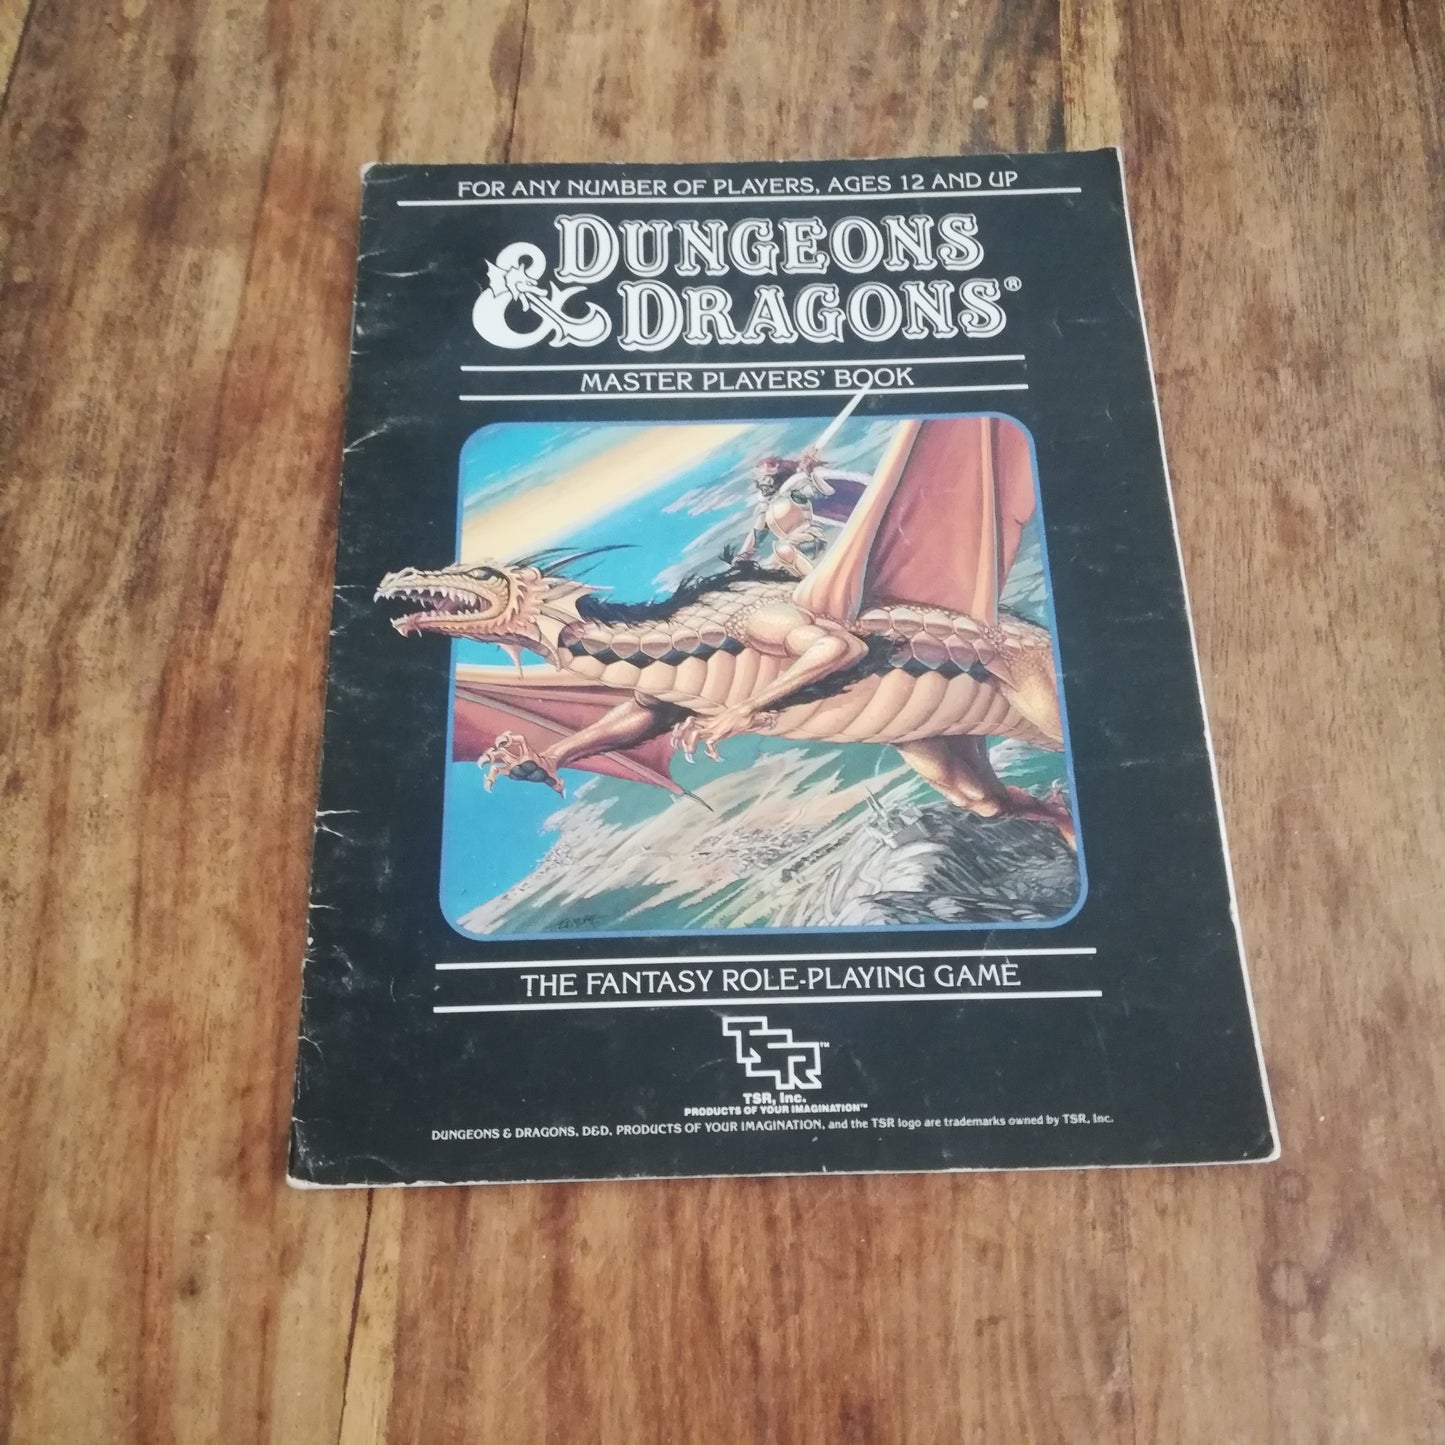 Dungeon & Dragons Master Player's Book - AllRoleplaying.com